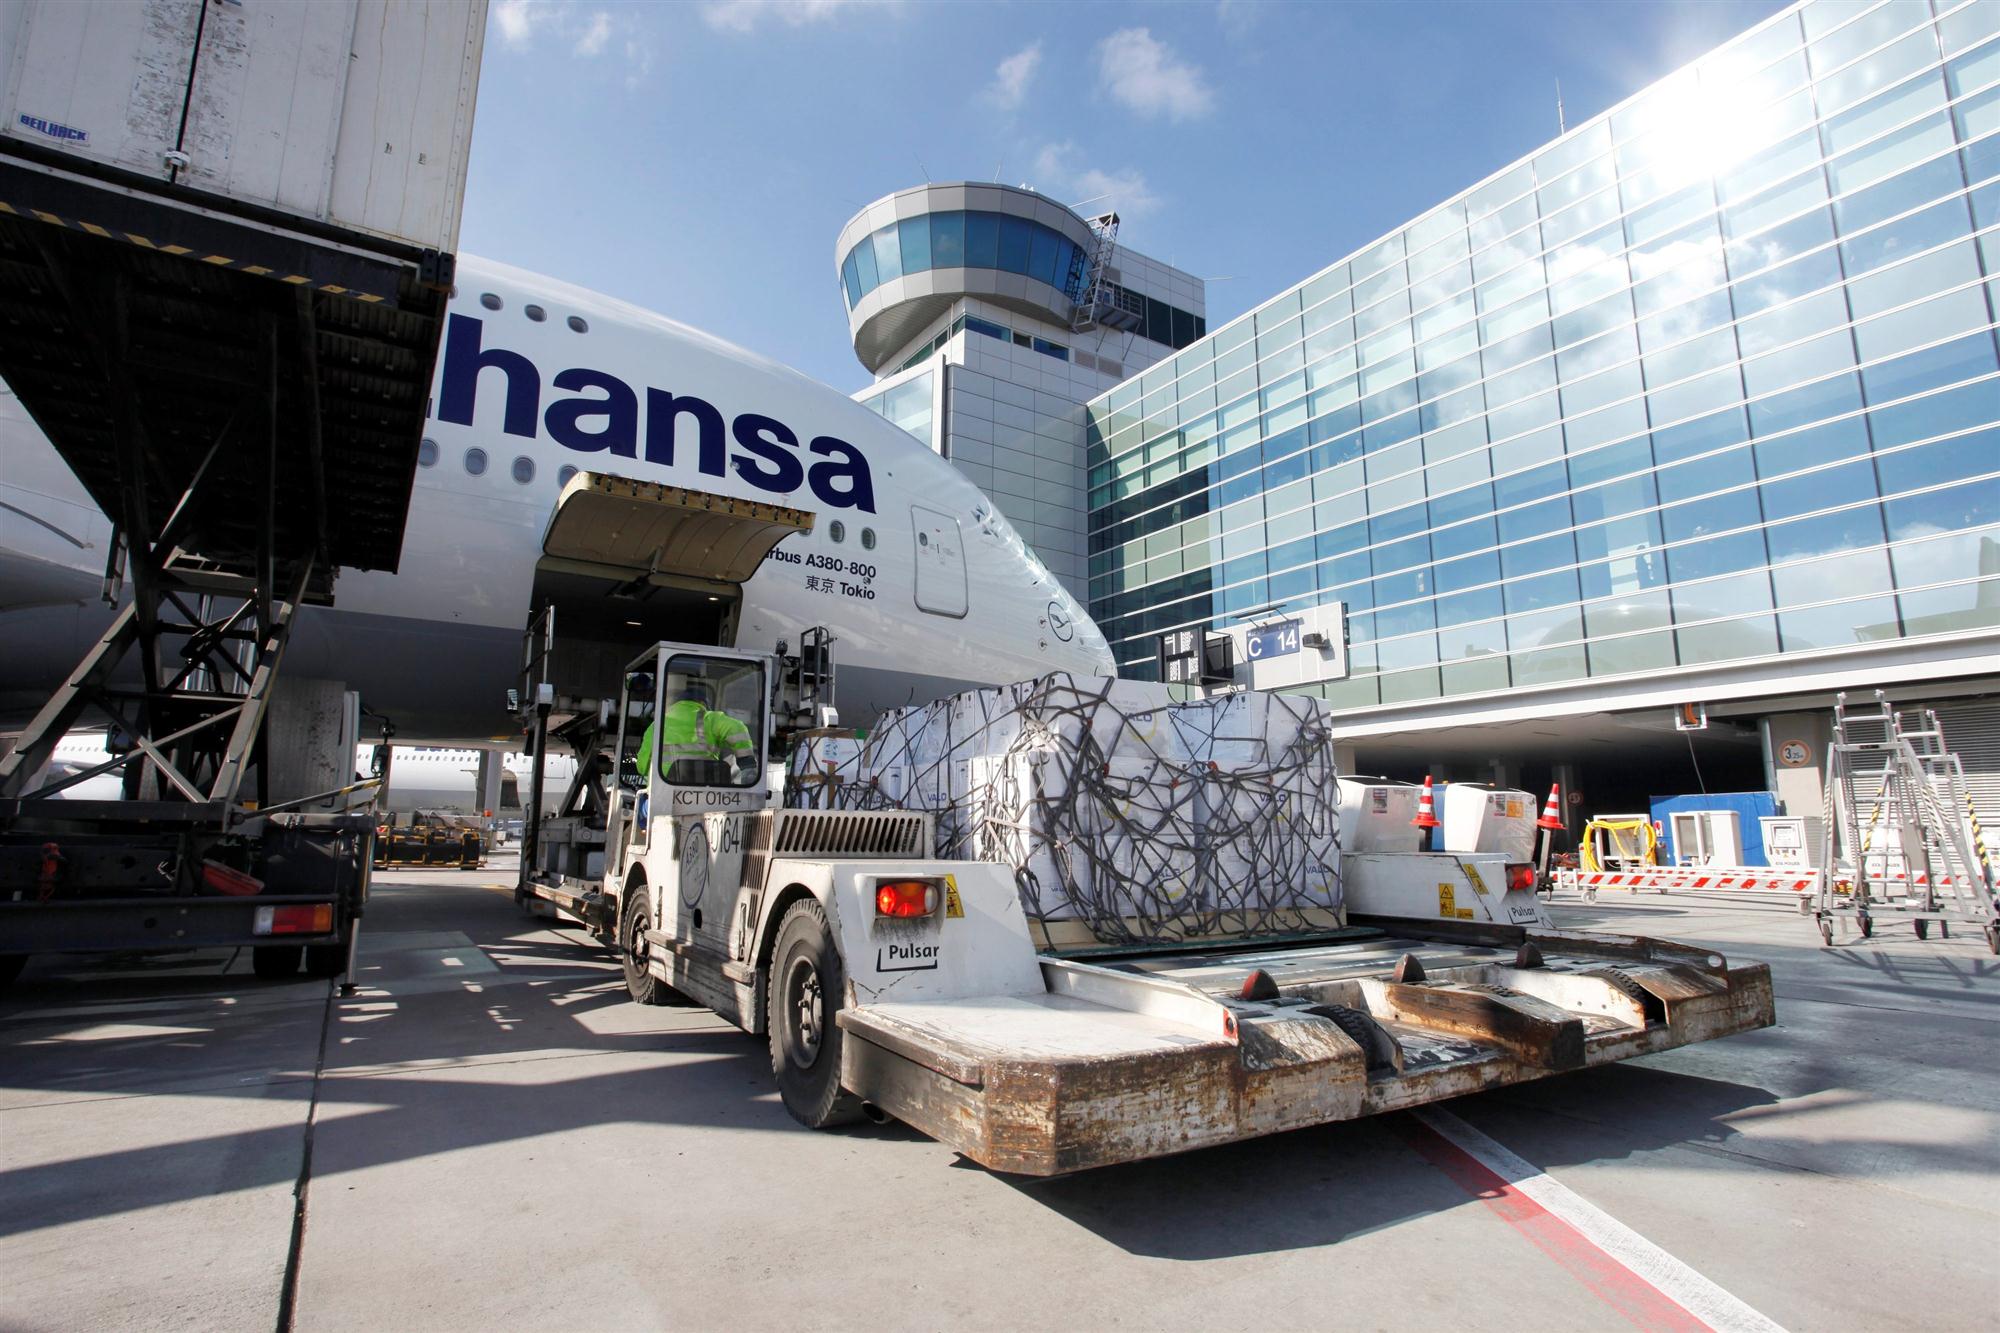 Self Photos / Files - Cargo being loaded at Frankfurt Airport